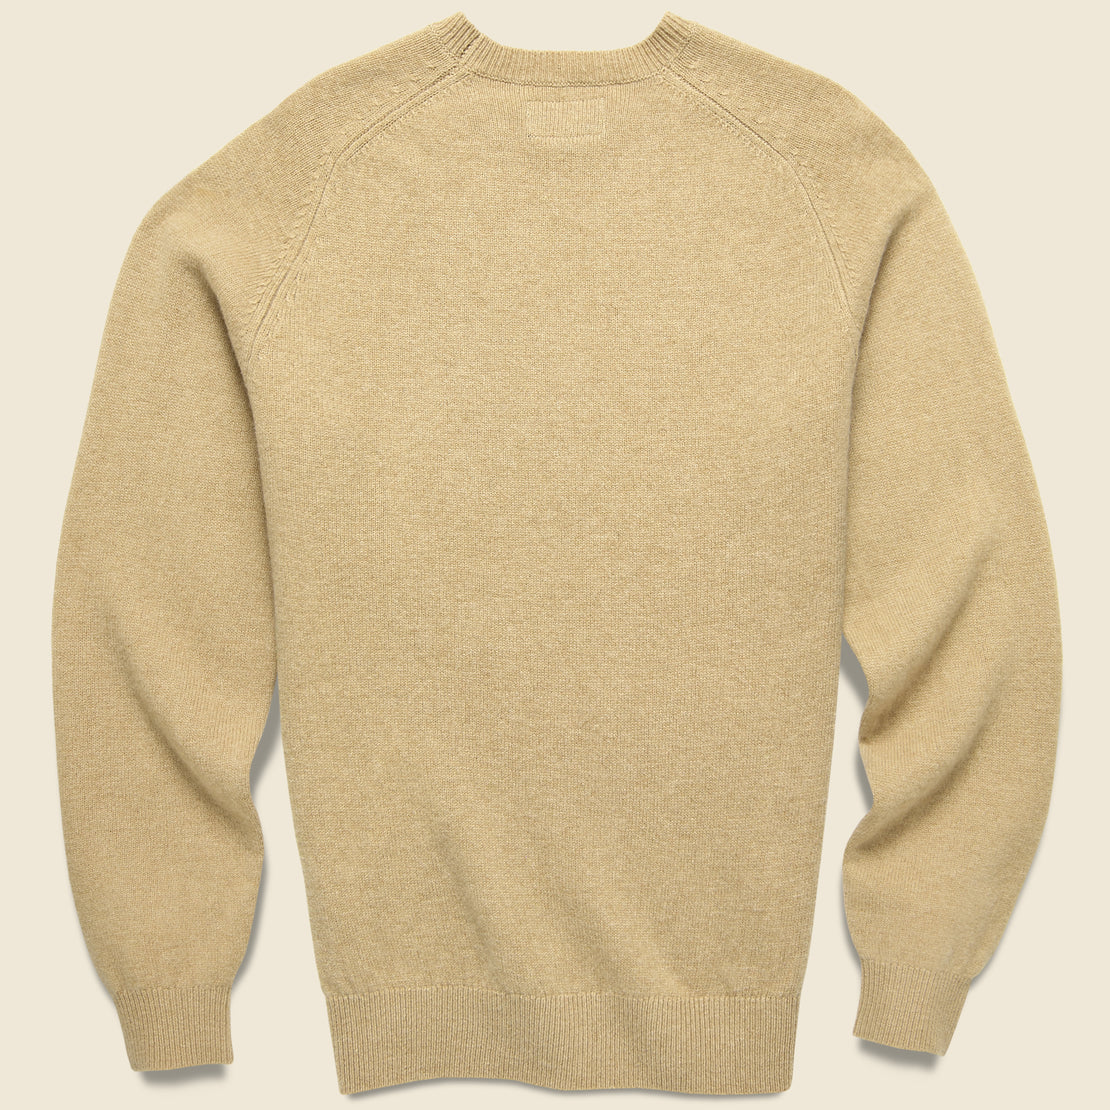 Merino Crew Sweater - Beige - BEAMS+ - STAG Provisions - Tops - Sweater